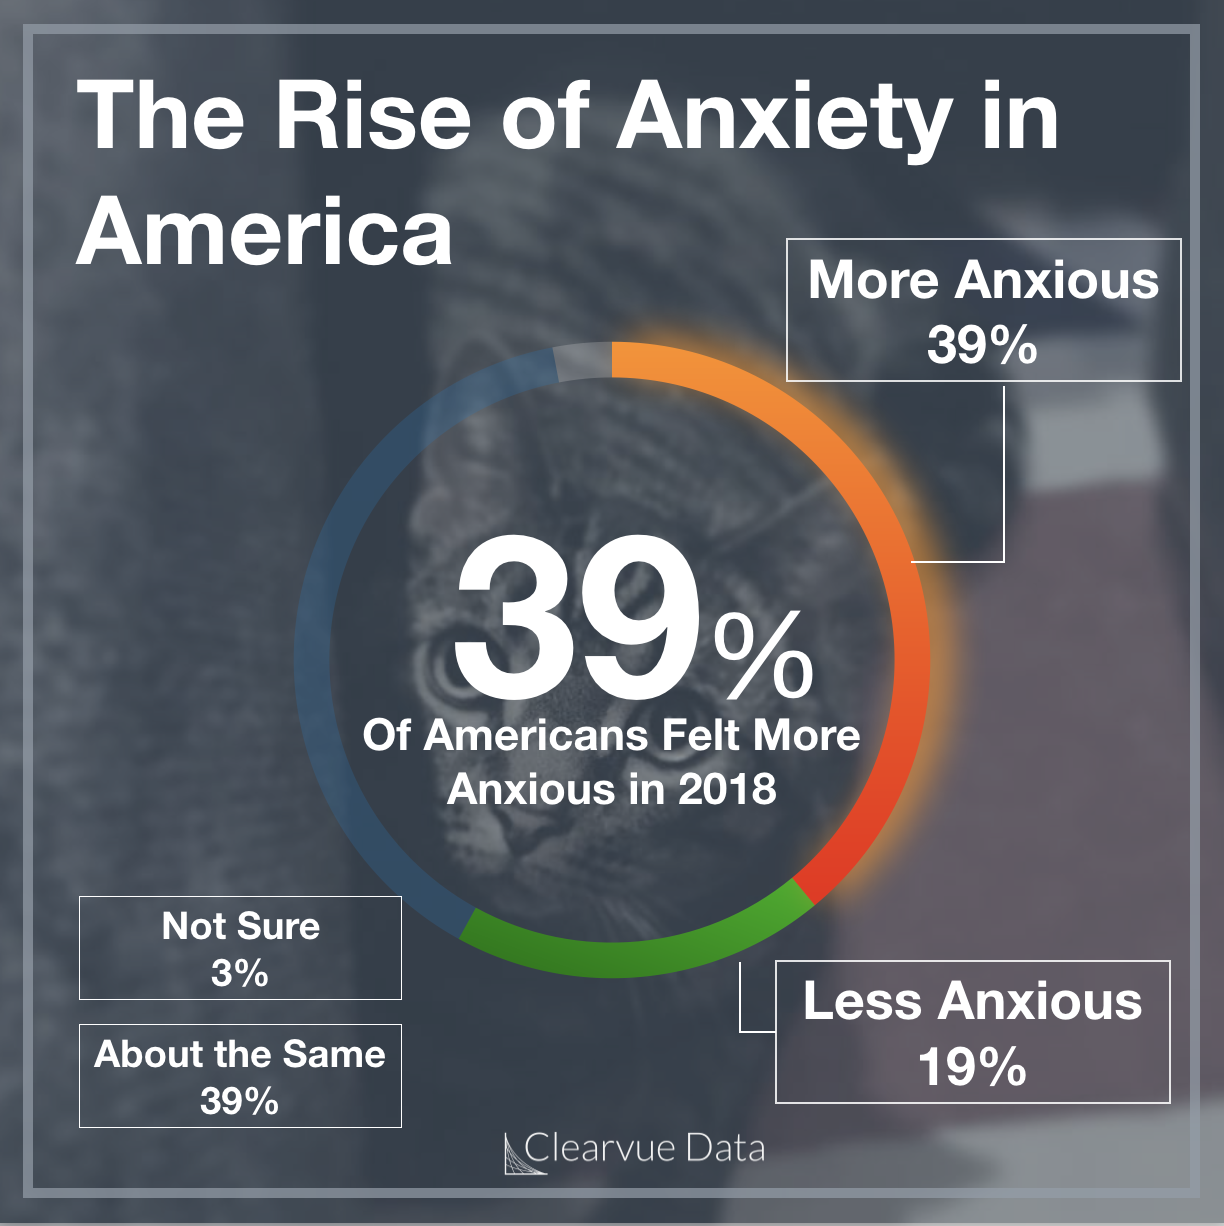 Many Americans are more anxious in 2018